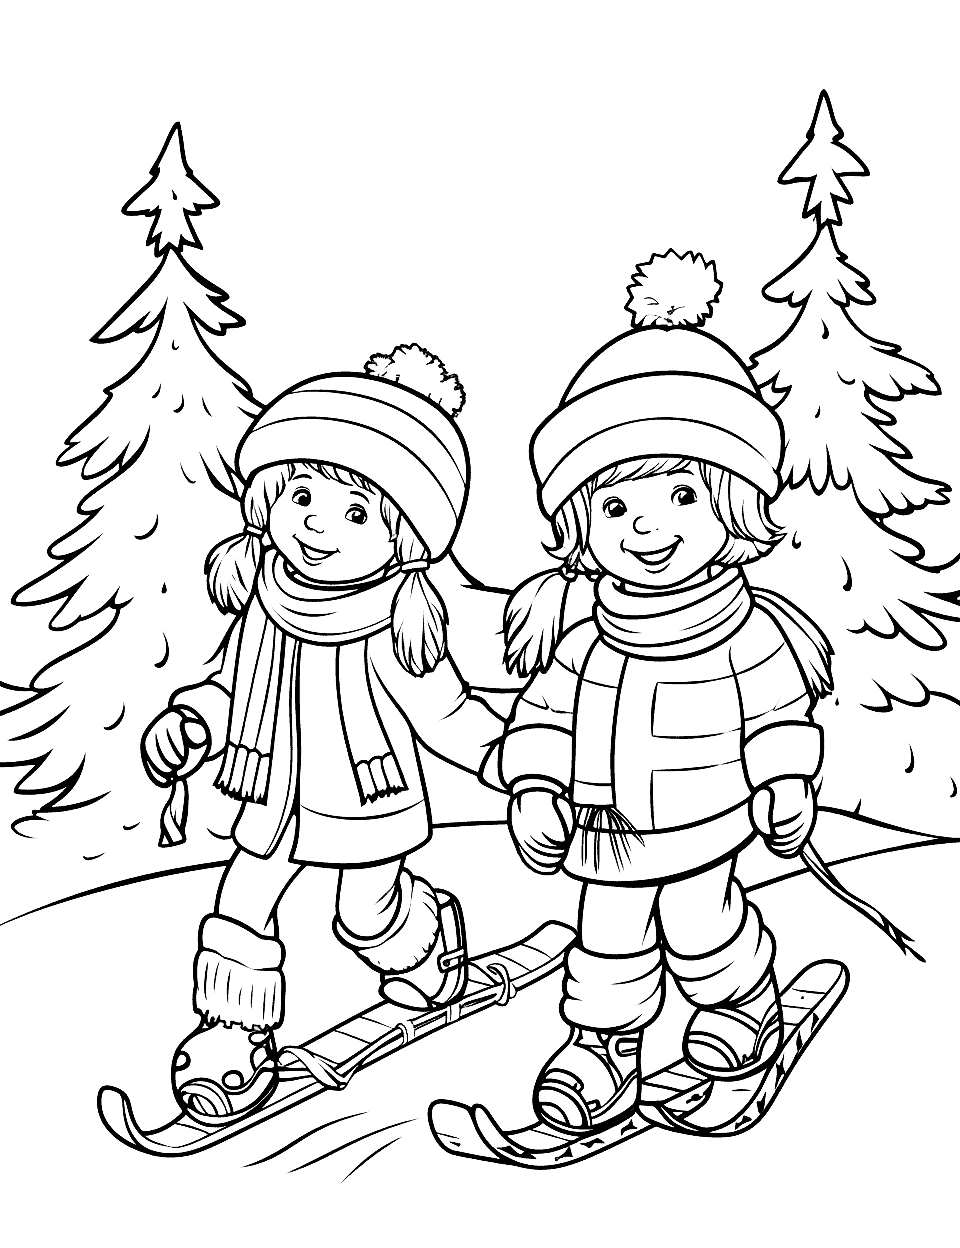 Snowboarding Adventure Christmas Coloring Page - Kids having a snowboarding adventure on a snowy Christmas day.